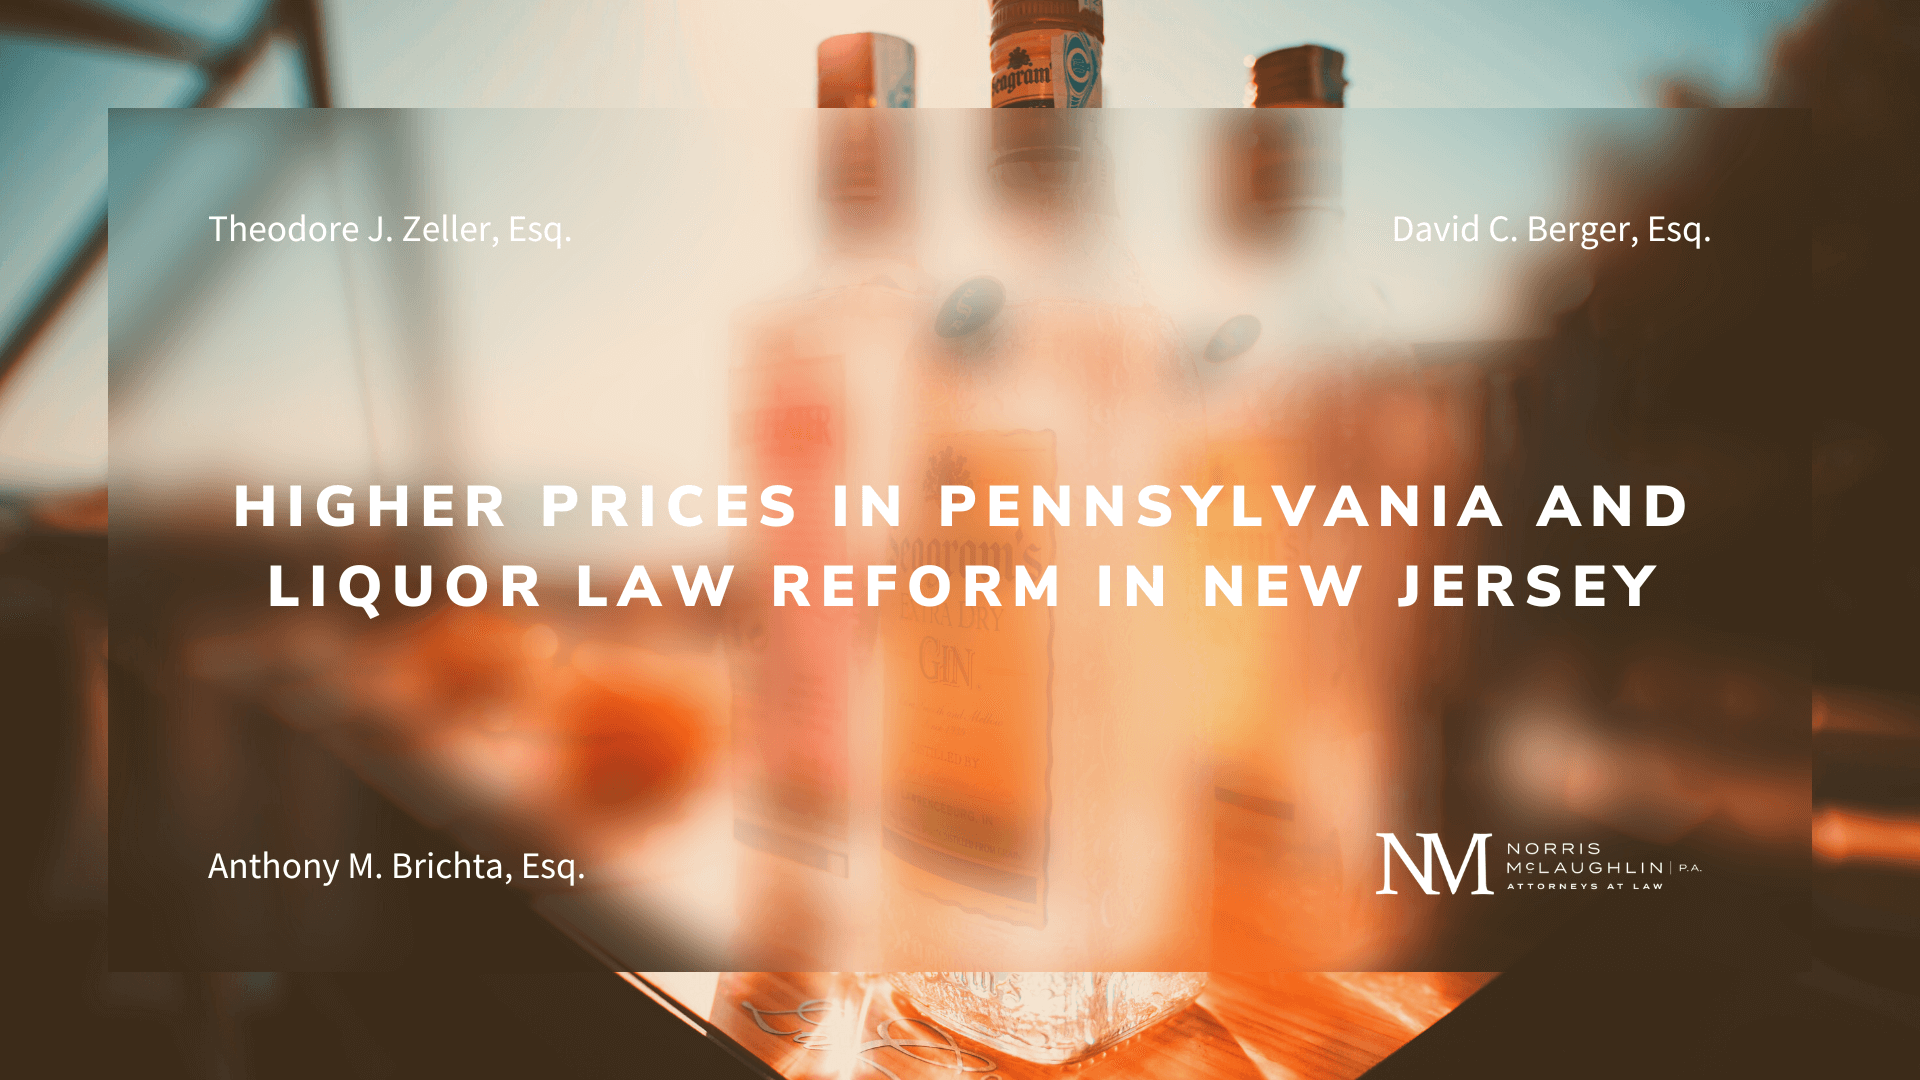 Higher Prices in Pennsylvania and Liquor Law Reform in New Jersey